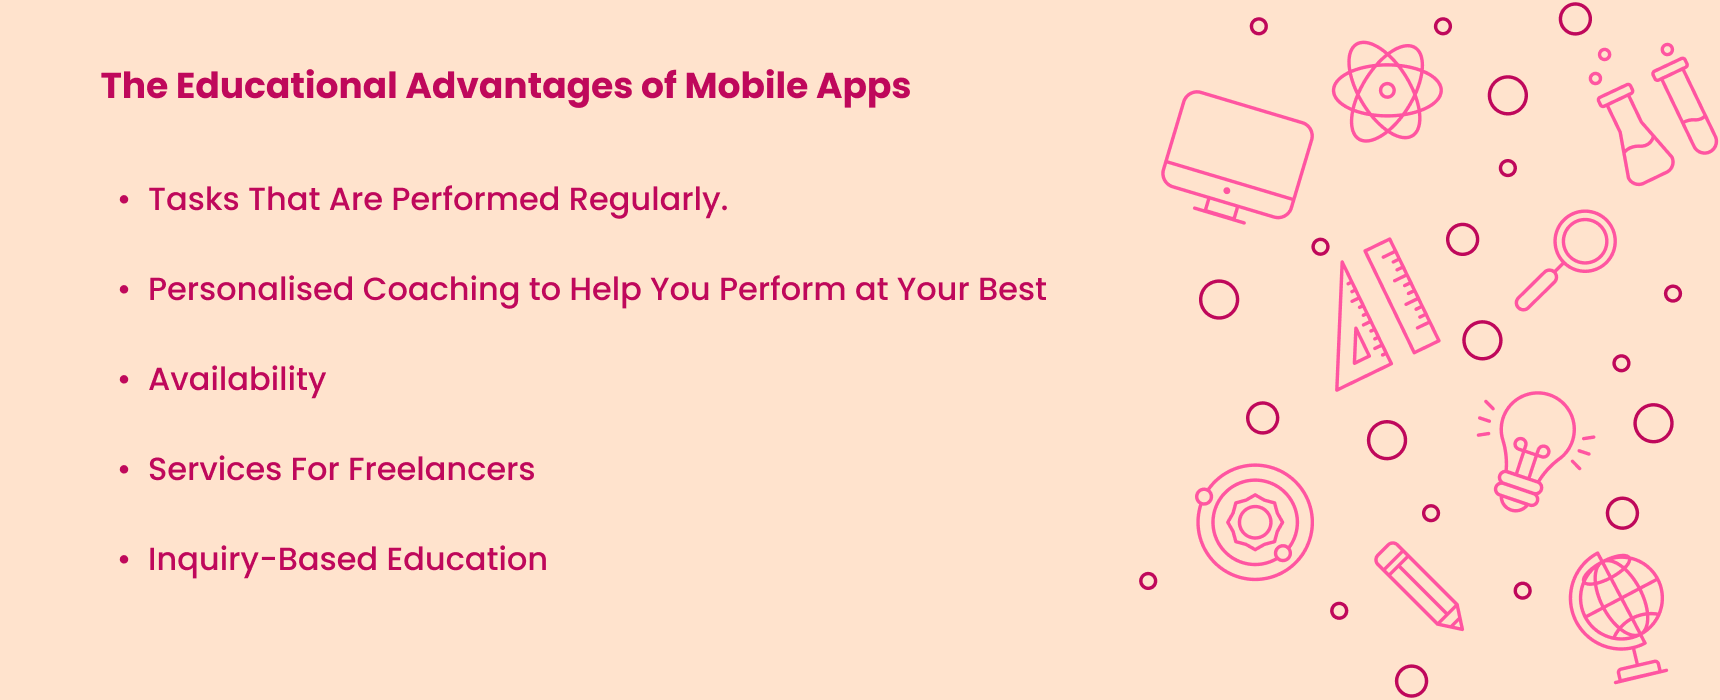 The Educational Advantages of Mobile Apps